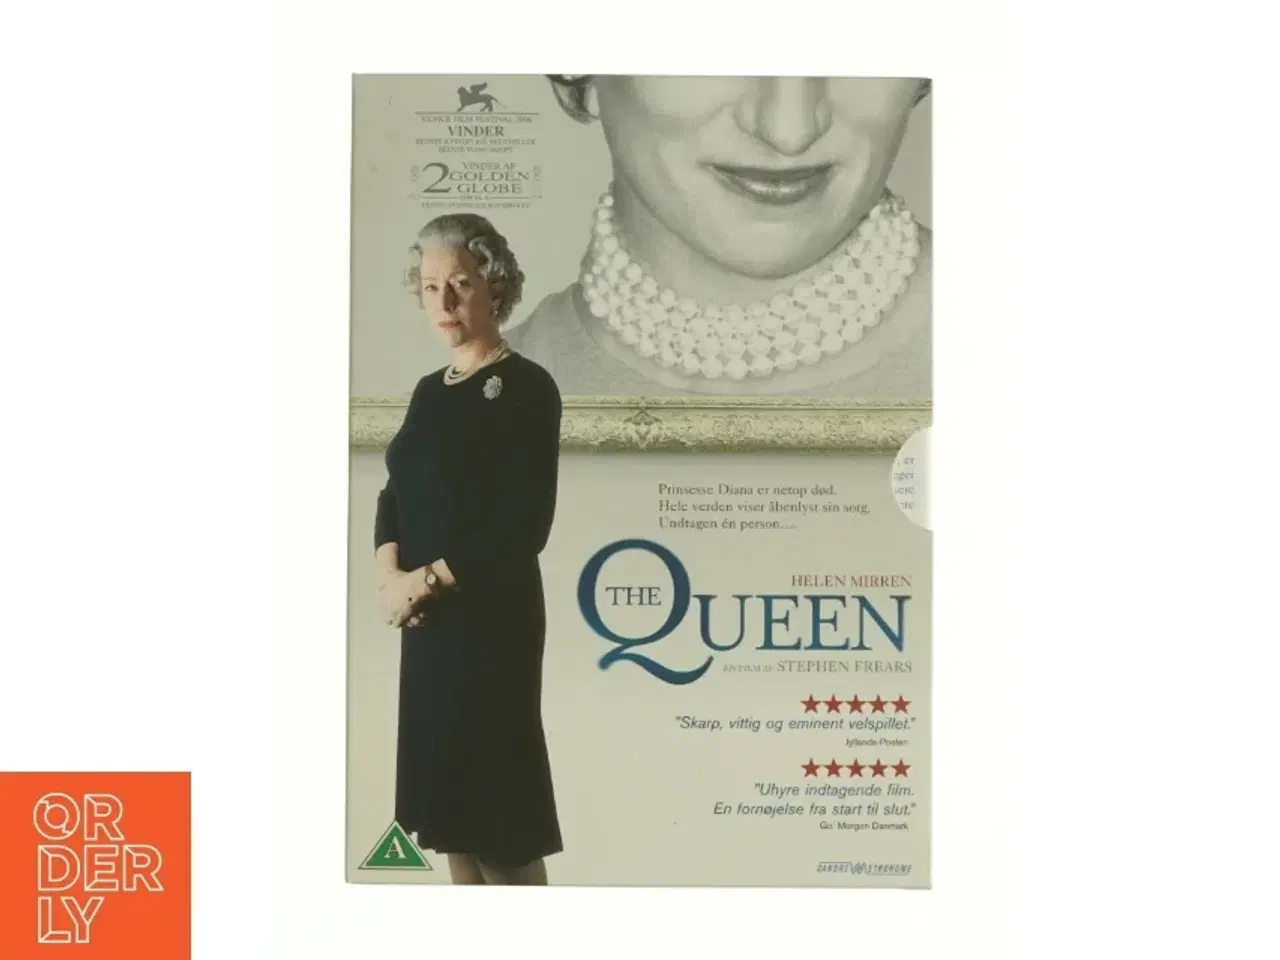 Billede 1 - Queen, The*                            <span class="label label-blank pull-right">Standard edition</span> fra DVD